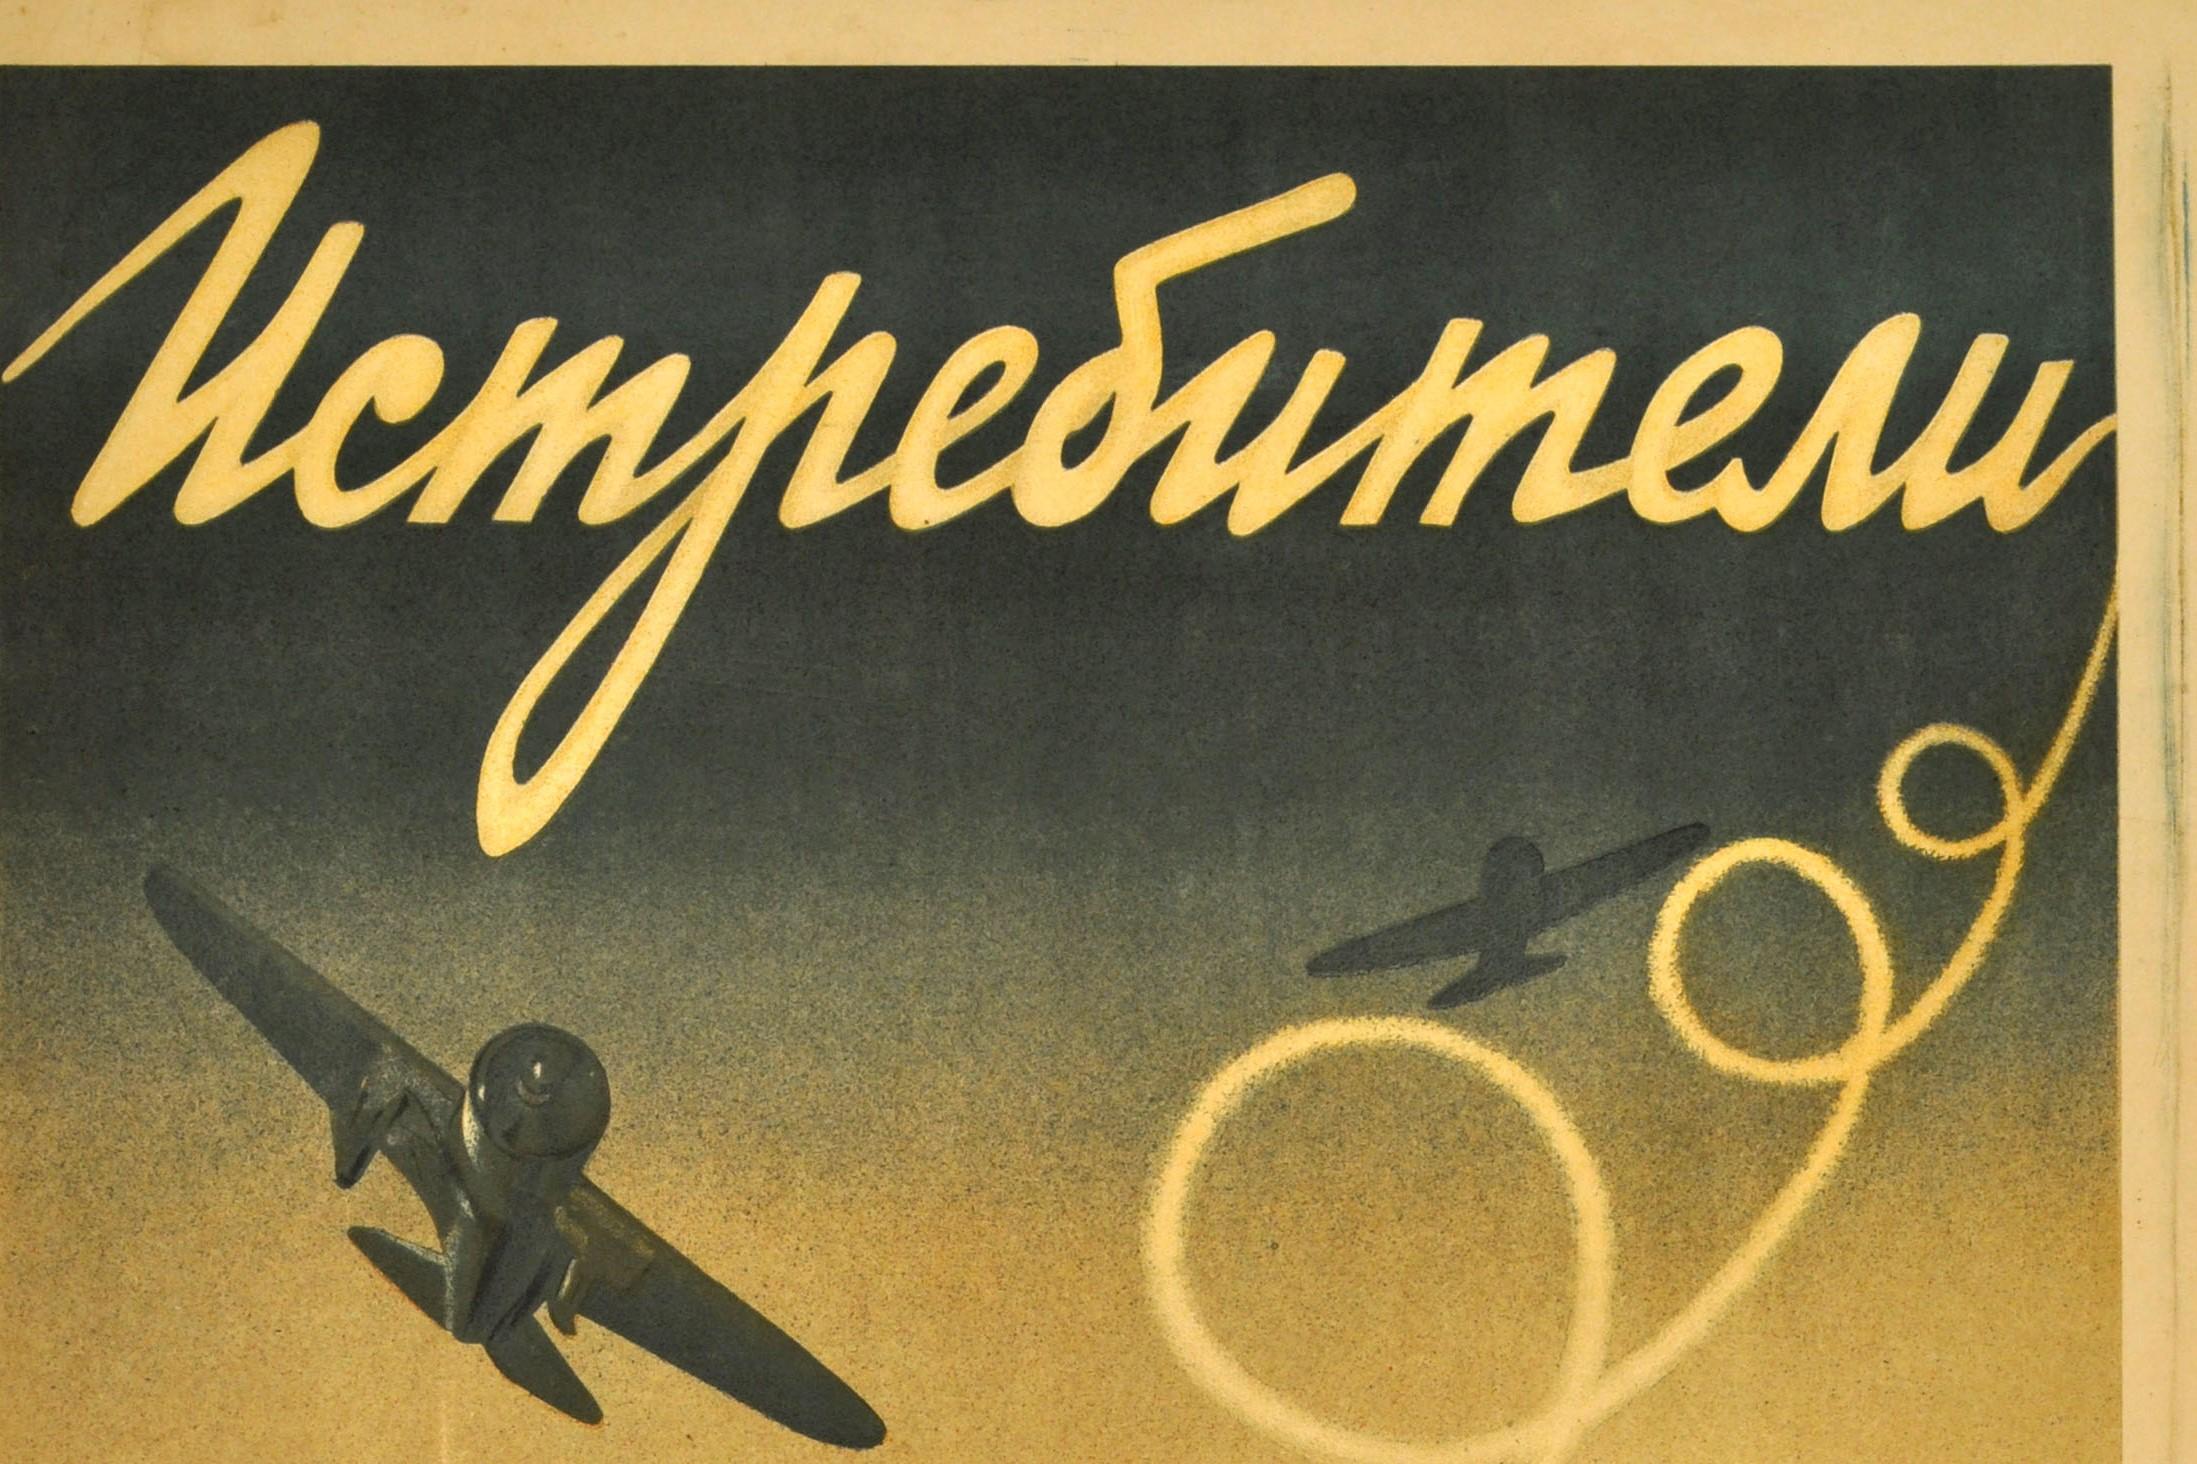 Original Rare Movie Poster for a Film about the Soviet Air Force Fighter Pilots - Print by Unknown